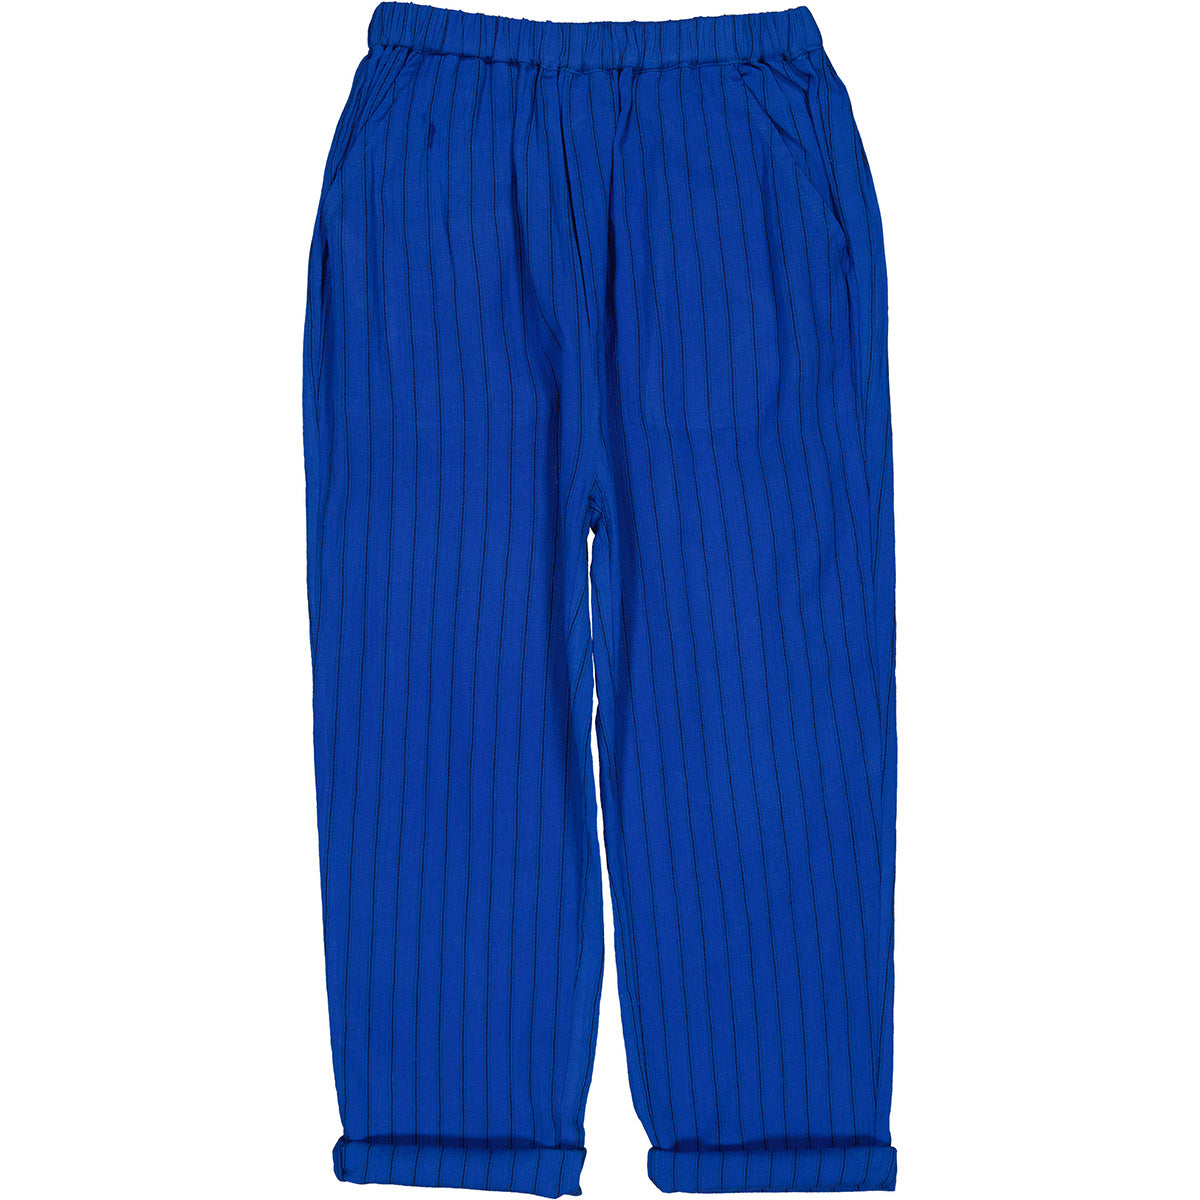 The Gazelle Cotton Crepe Stripe Pants from Louis Louise. Elasticated waistband for easy slip-on, two patch pockets